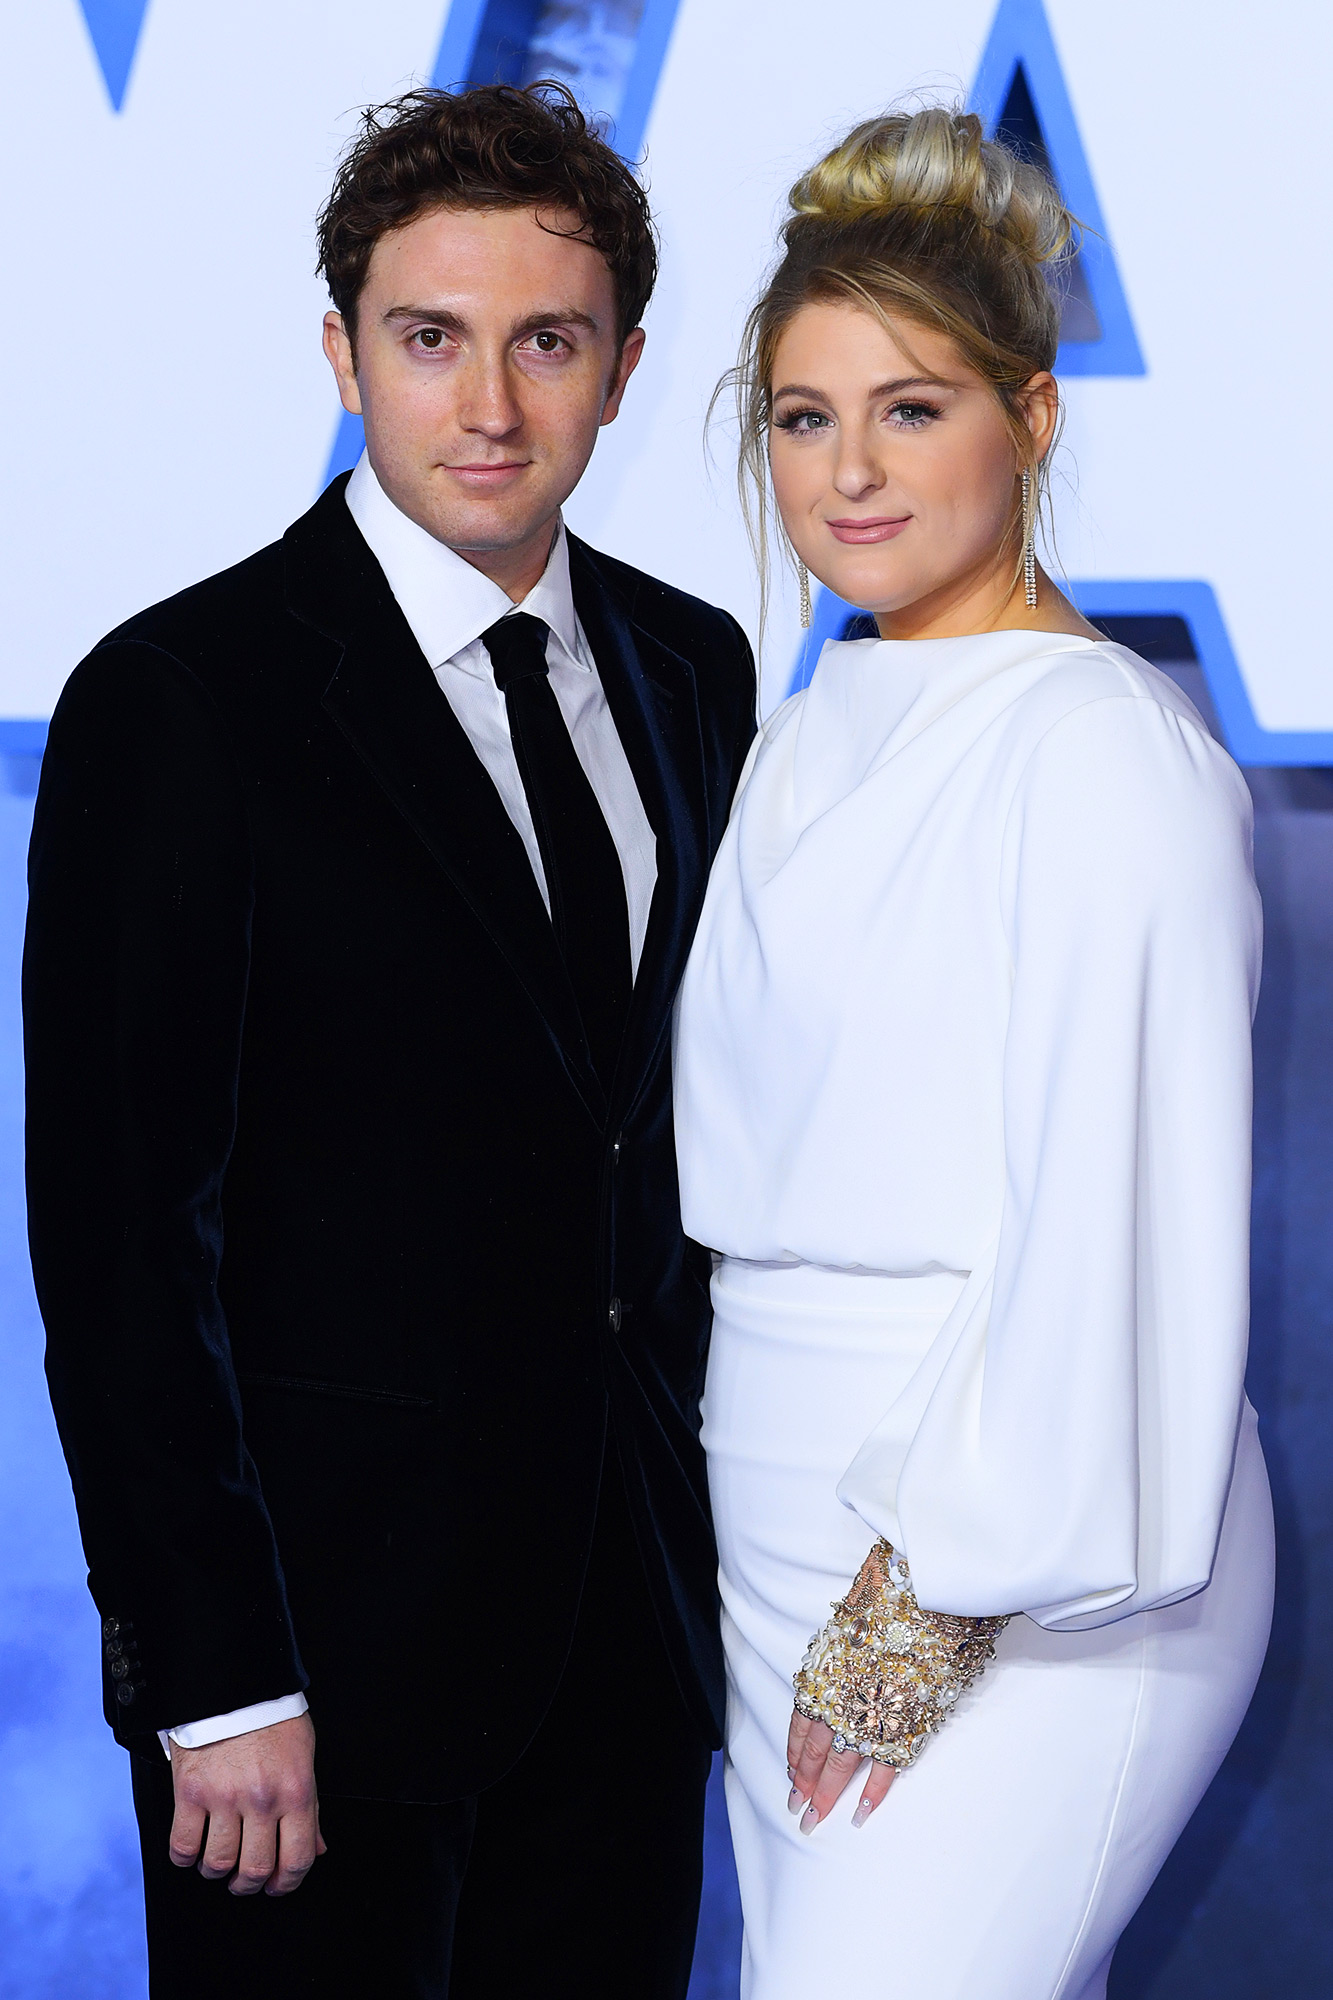 Pregnant Meghan Trainor Discusses Nightmare Sex With Daryl Sabara image pic